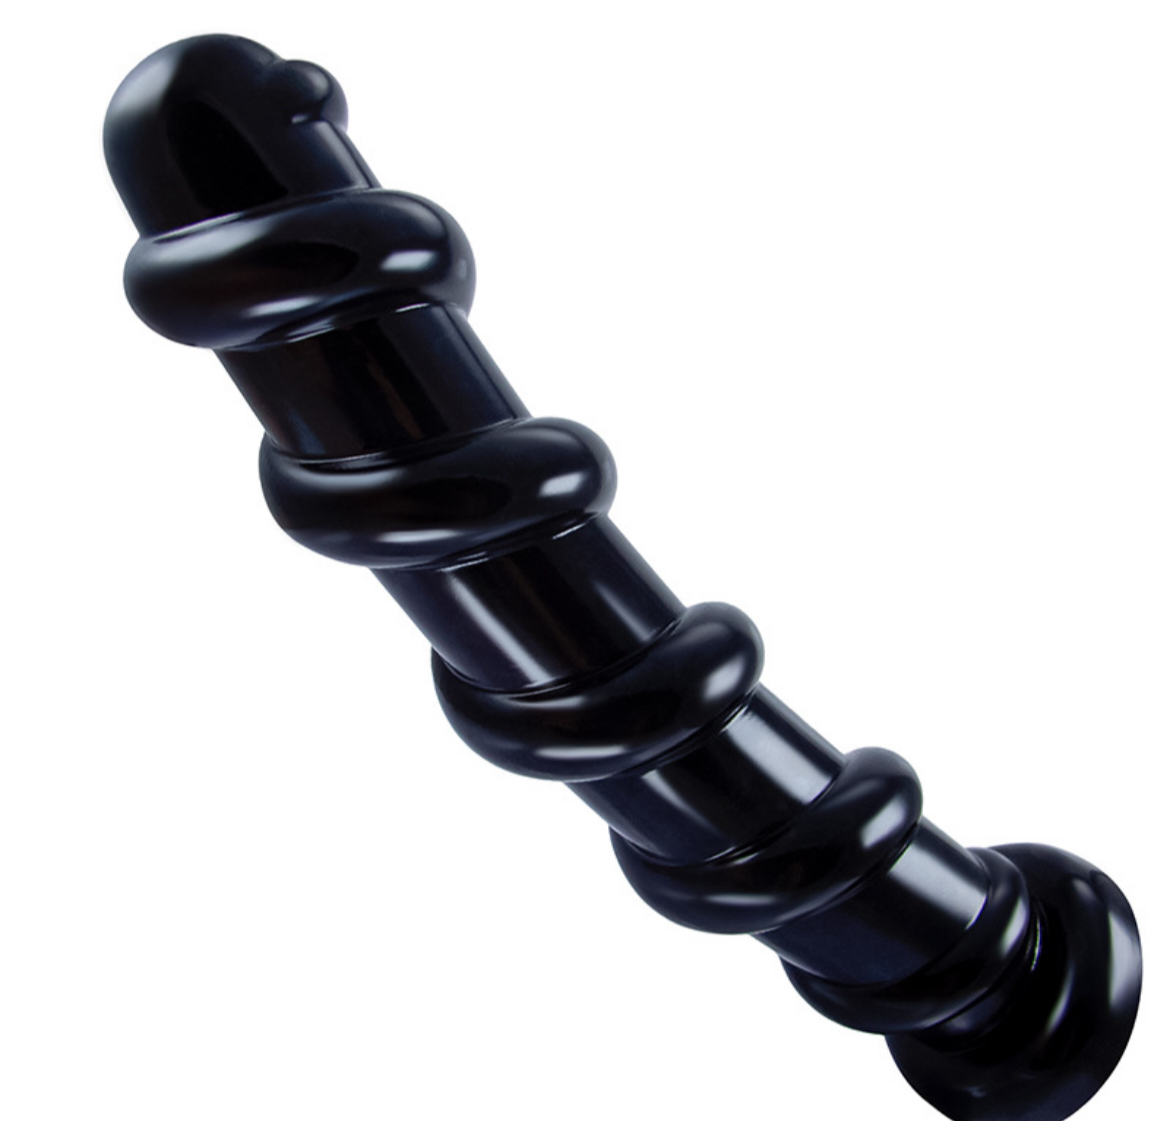 Screwed dildo, unique and different dildo in the shape of a large screw.